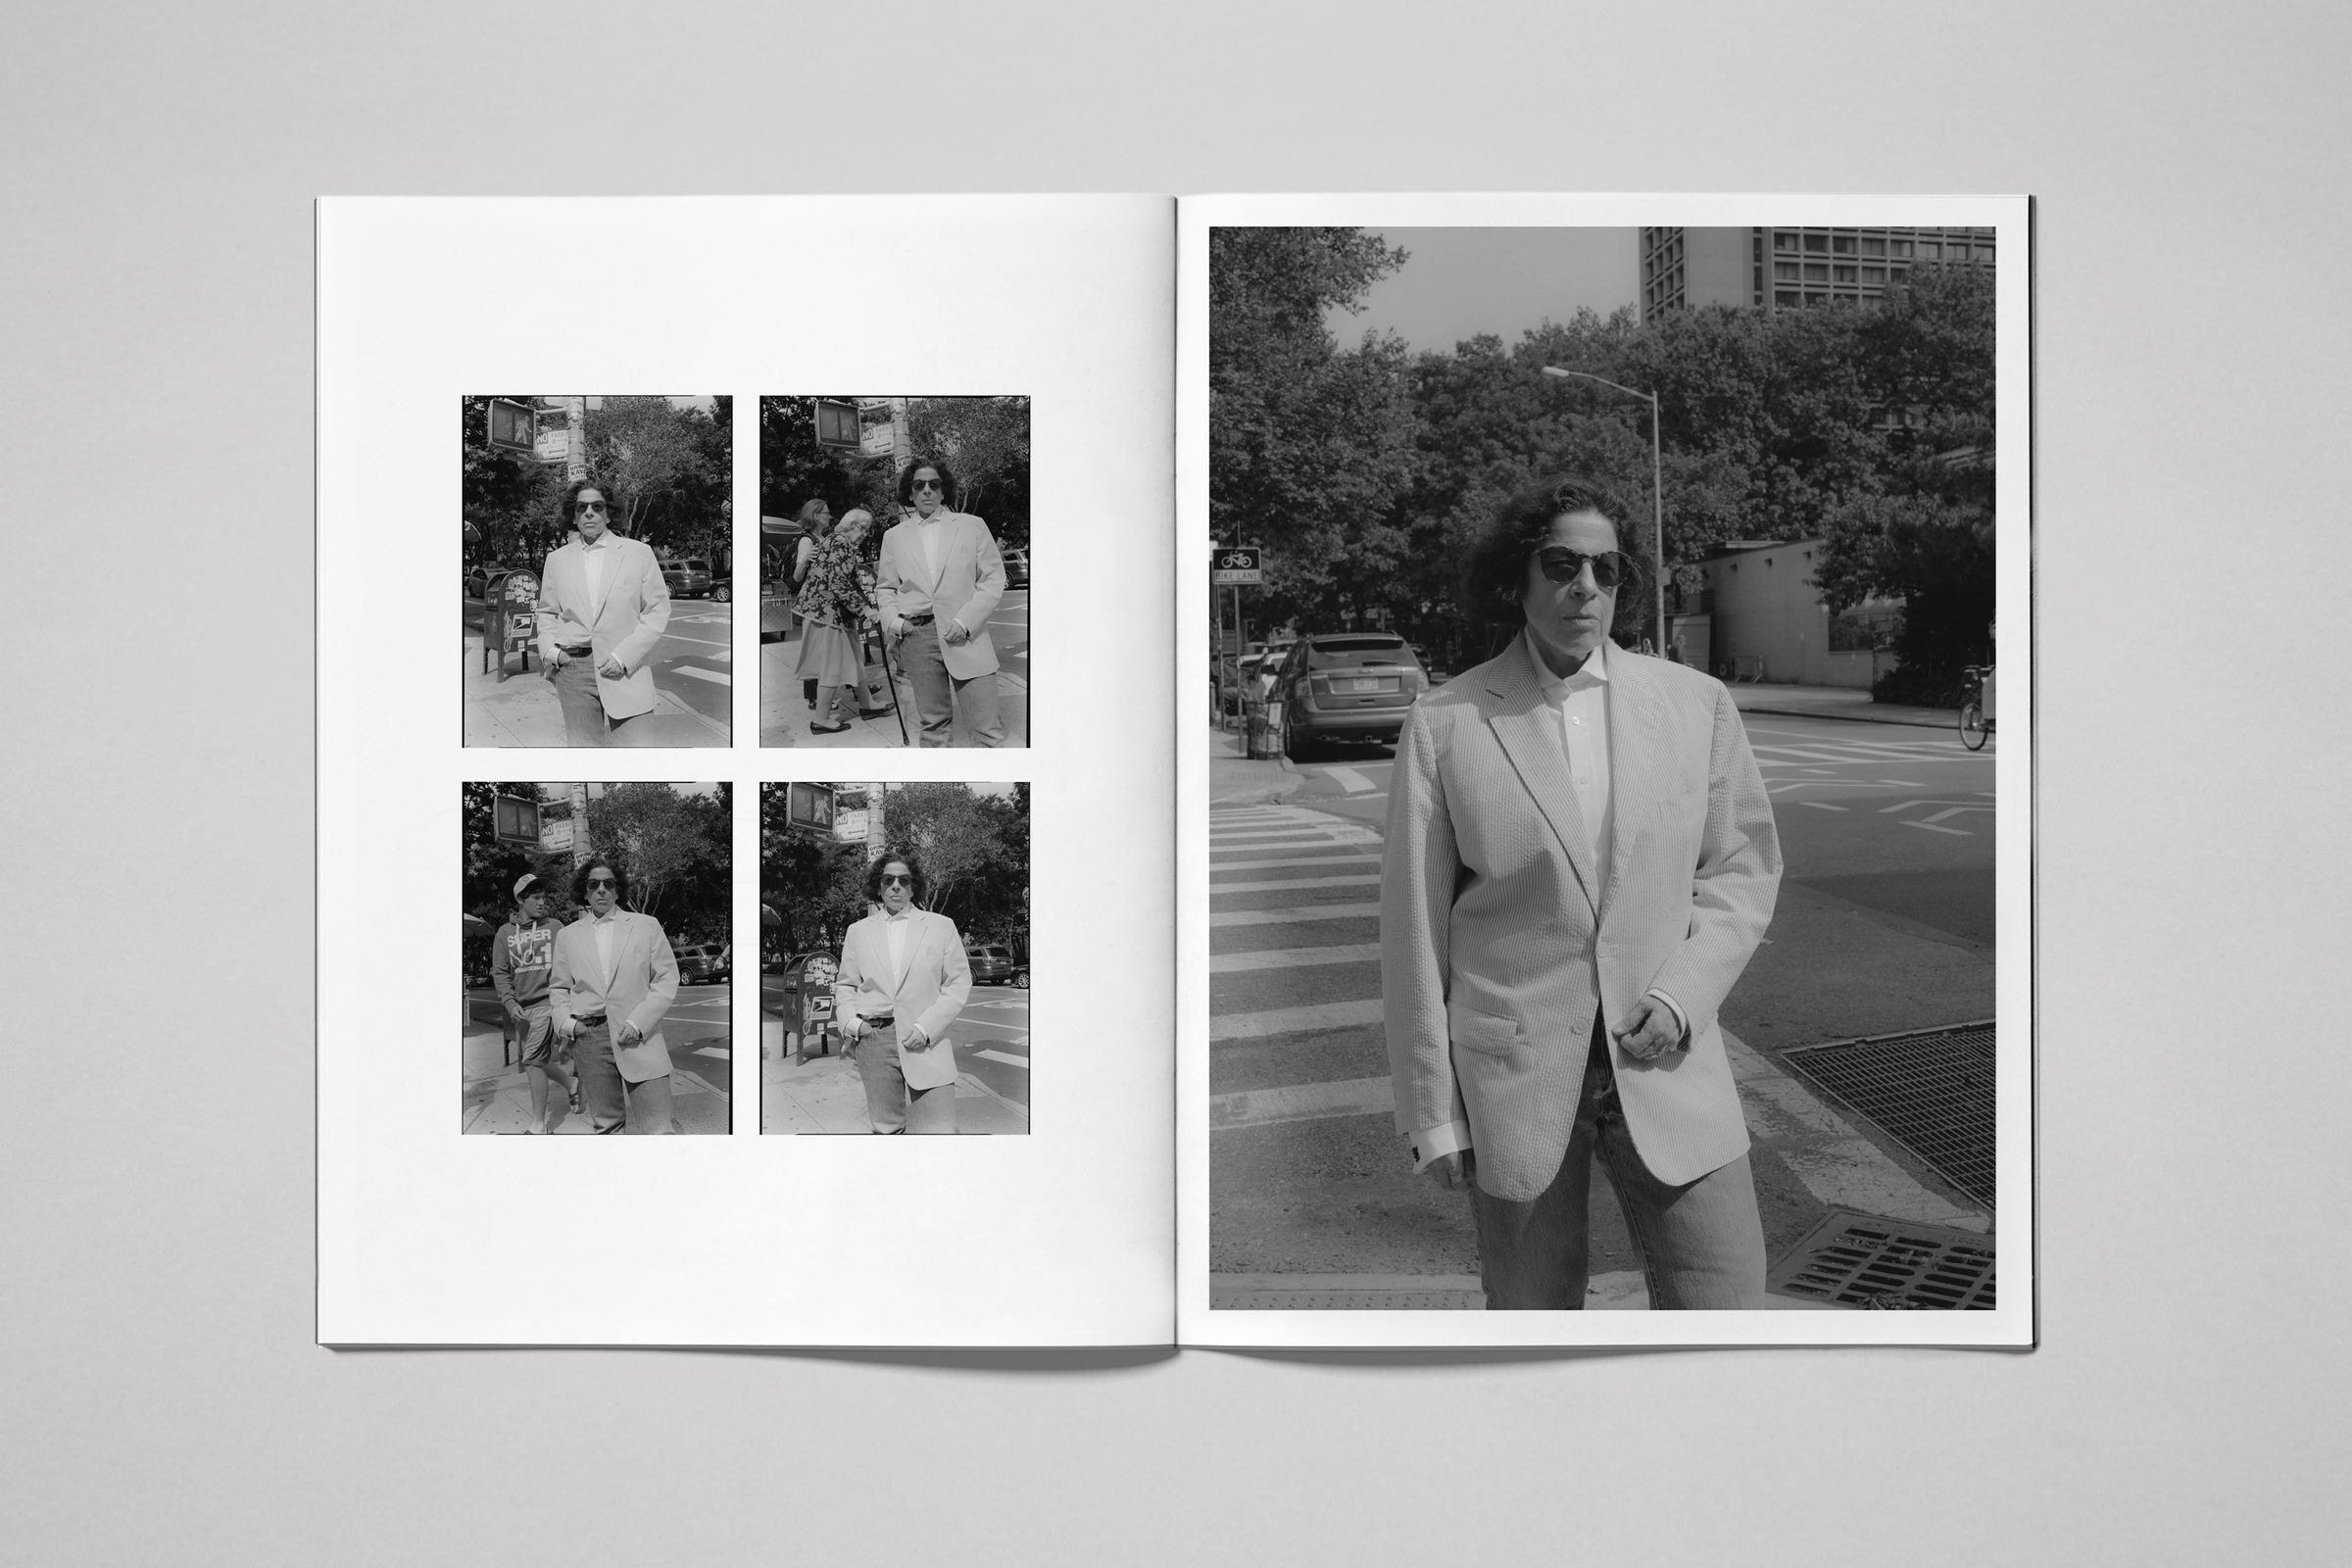 Rika Magazine issue no. 16 Fran Lebowitz photographed by Coco Capitan